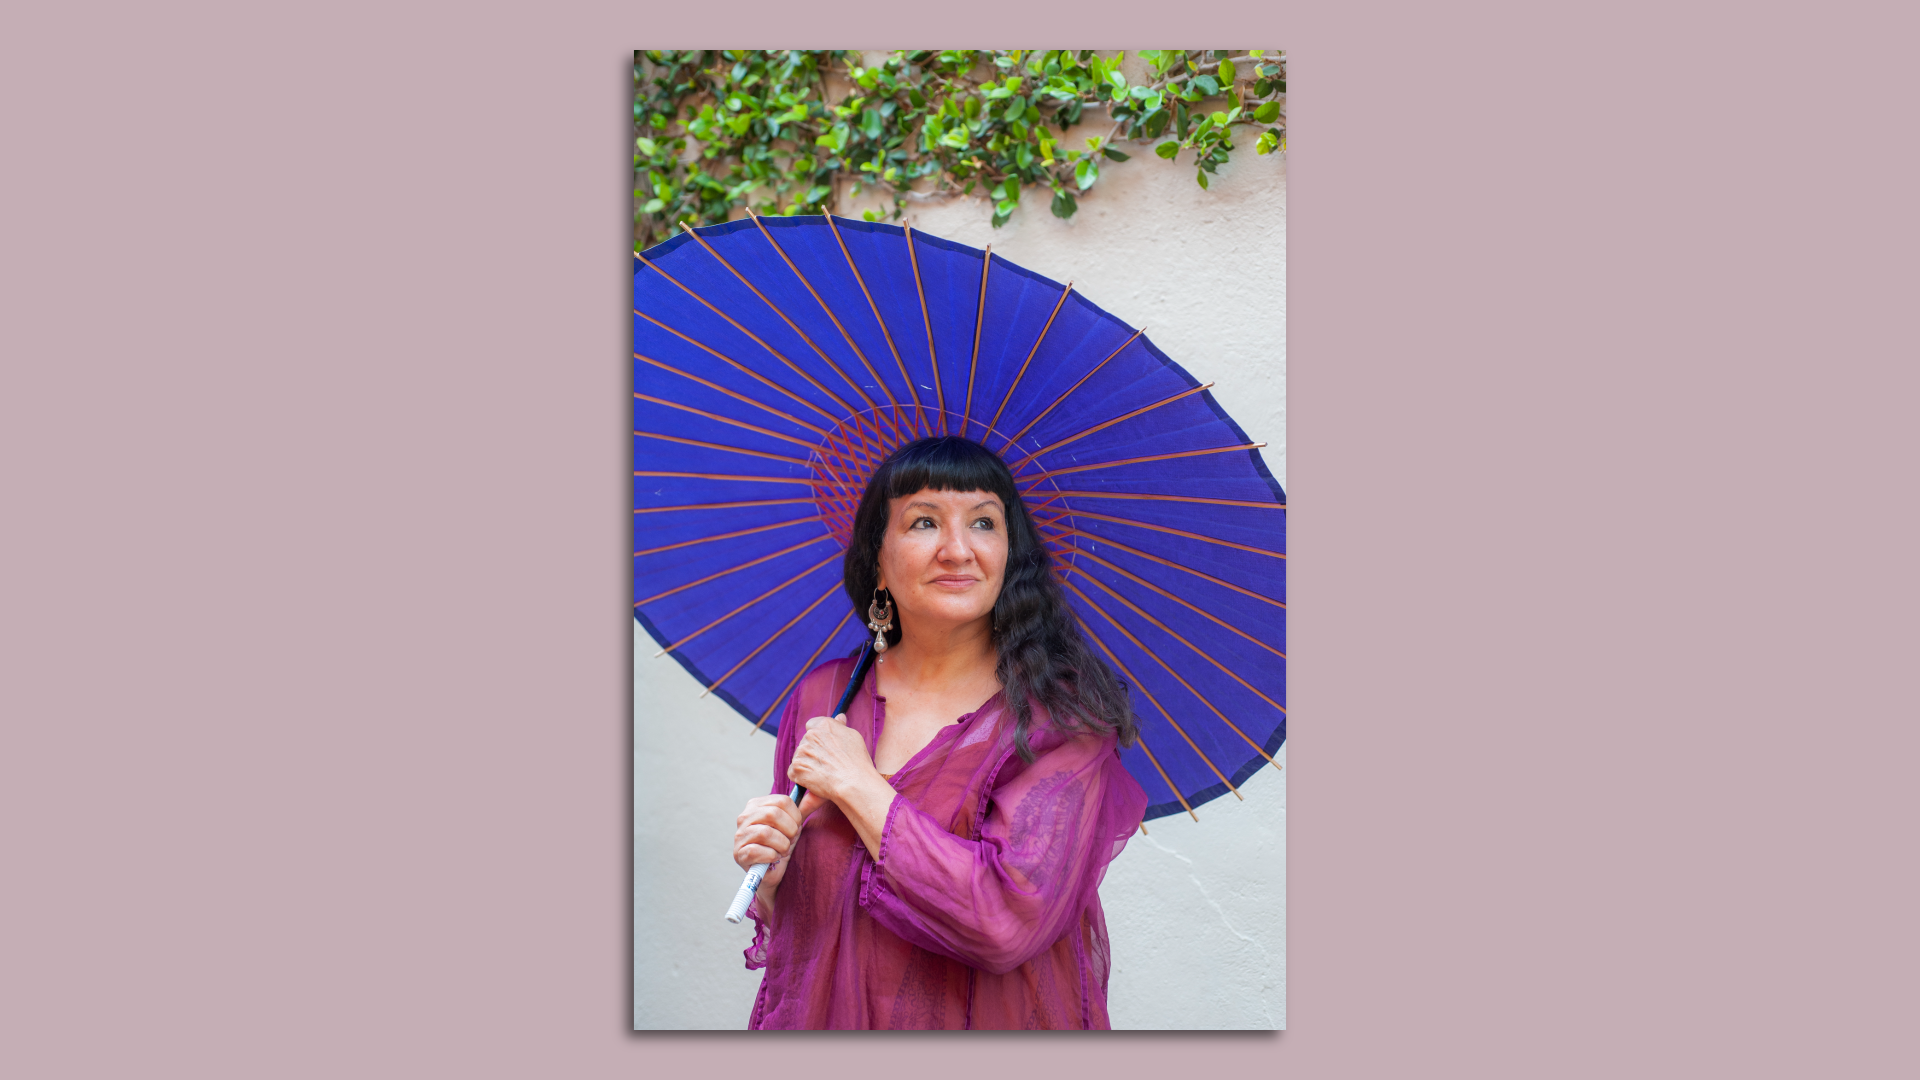 Sandra Cisneros is shown wearing a bright magenta top and holding a bright purple umbrella, against a white wall with green plants hanging above.